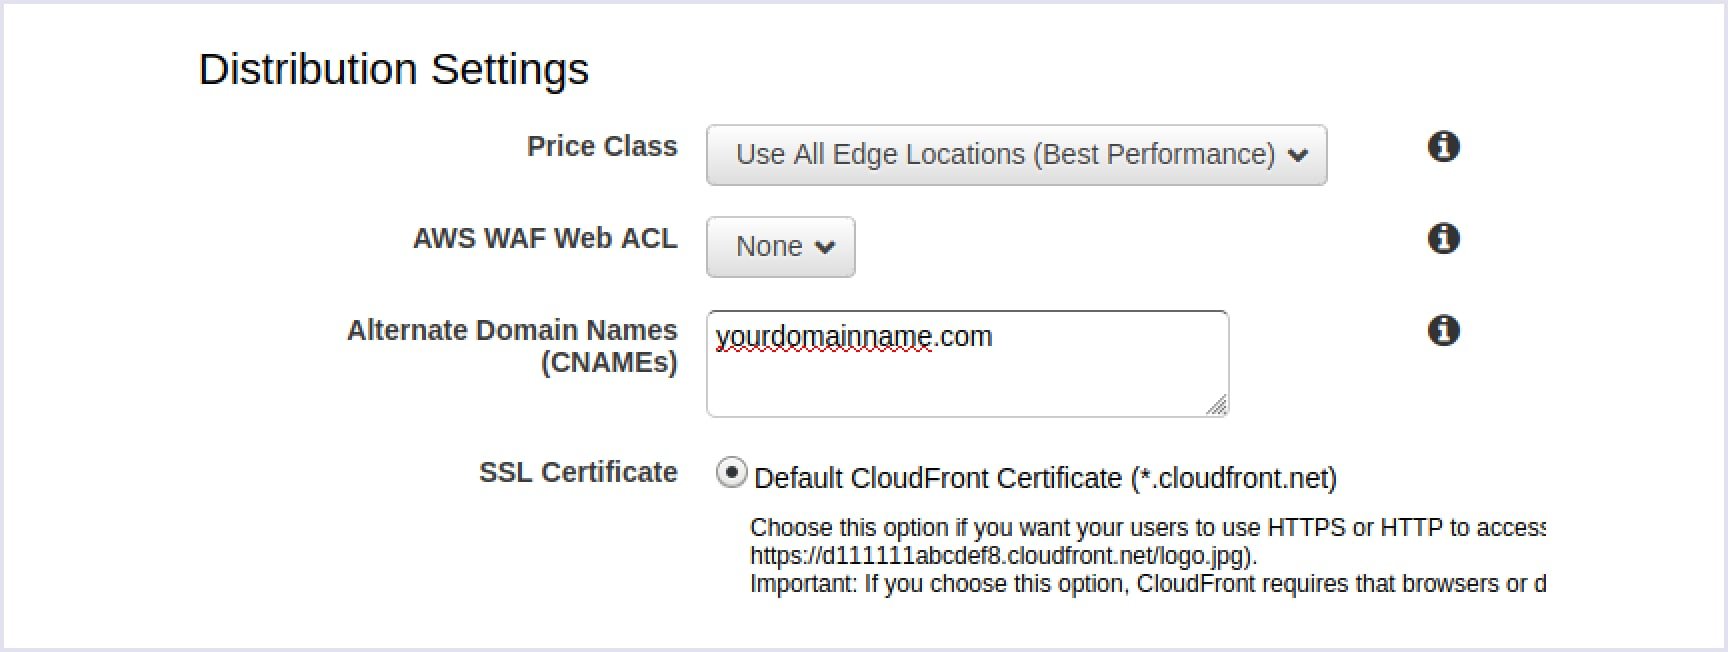 Entering real domain name and getting default CloudFront certificate